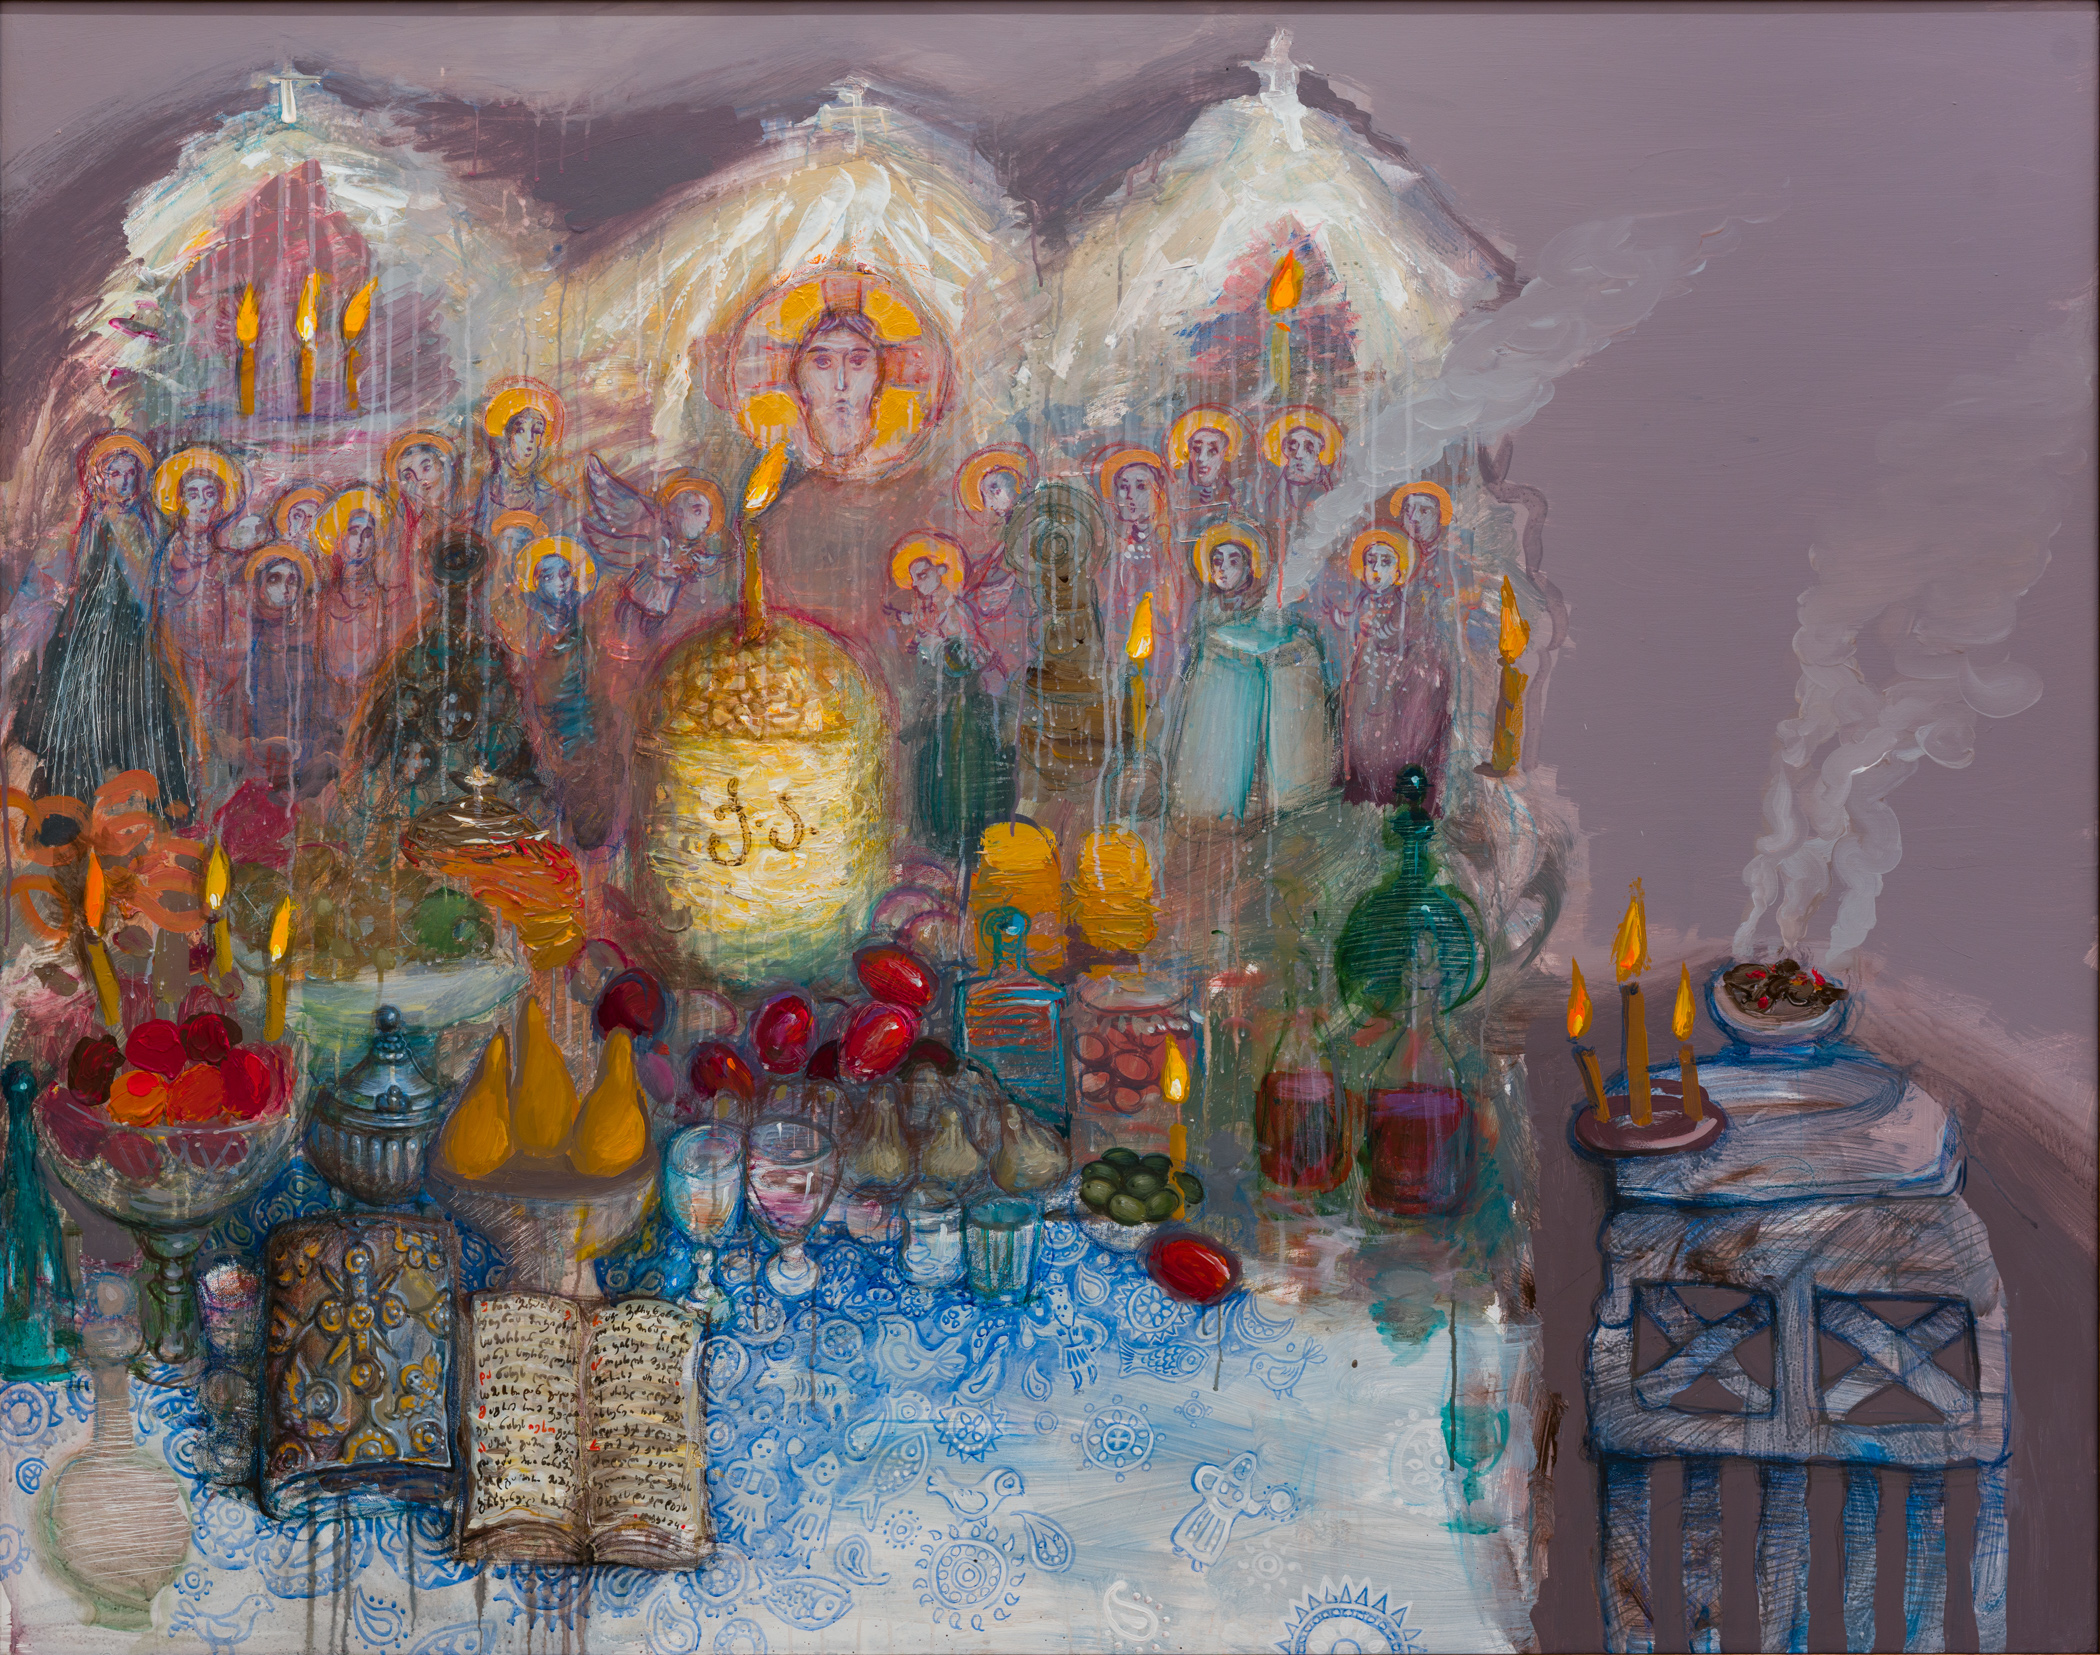 Painting: Still-Life by Dato Popiashvili at The Library of Congress - Rooted in Culture, Size:150 X 120 cm , Medium: Acrylic on Canvas Art Gallery Line - Contemporary Georgian Art